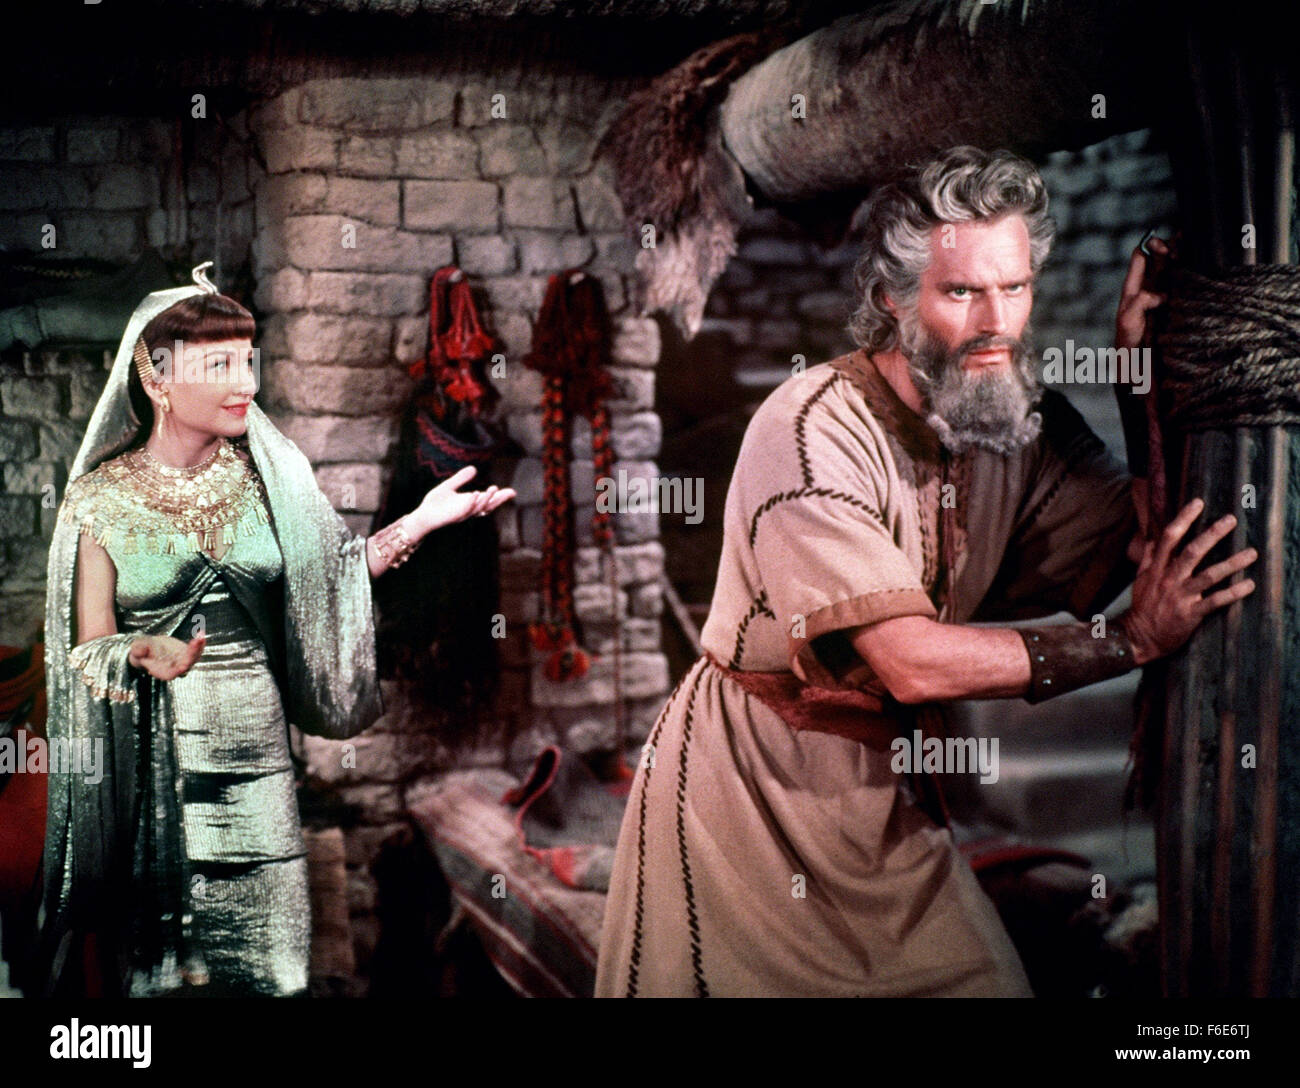 RELEASED DATE: Oct 05, 1956. MOVIE TITLE: The Ten Commandments. STUDIO: Paramount Pictures. PLOT: Moses leads the slaves from the tyranny of the Egyptian pharaoh and into the desert where he is later given the law of God. Once the pharaoh's chief architect, Moses receives the attentions of the Queen until he rebels and is cast into exile. PICTURED: CHARLTON HESTON and ANNE BAXTER star as Moses and Nefretiri. Stock Photo